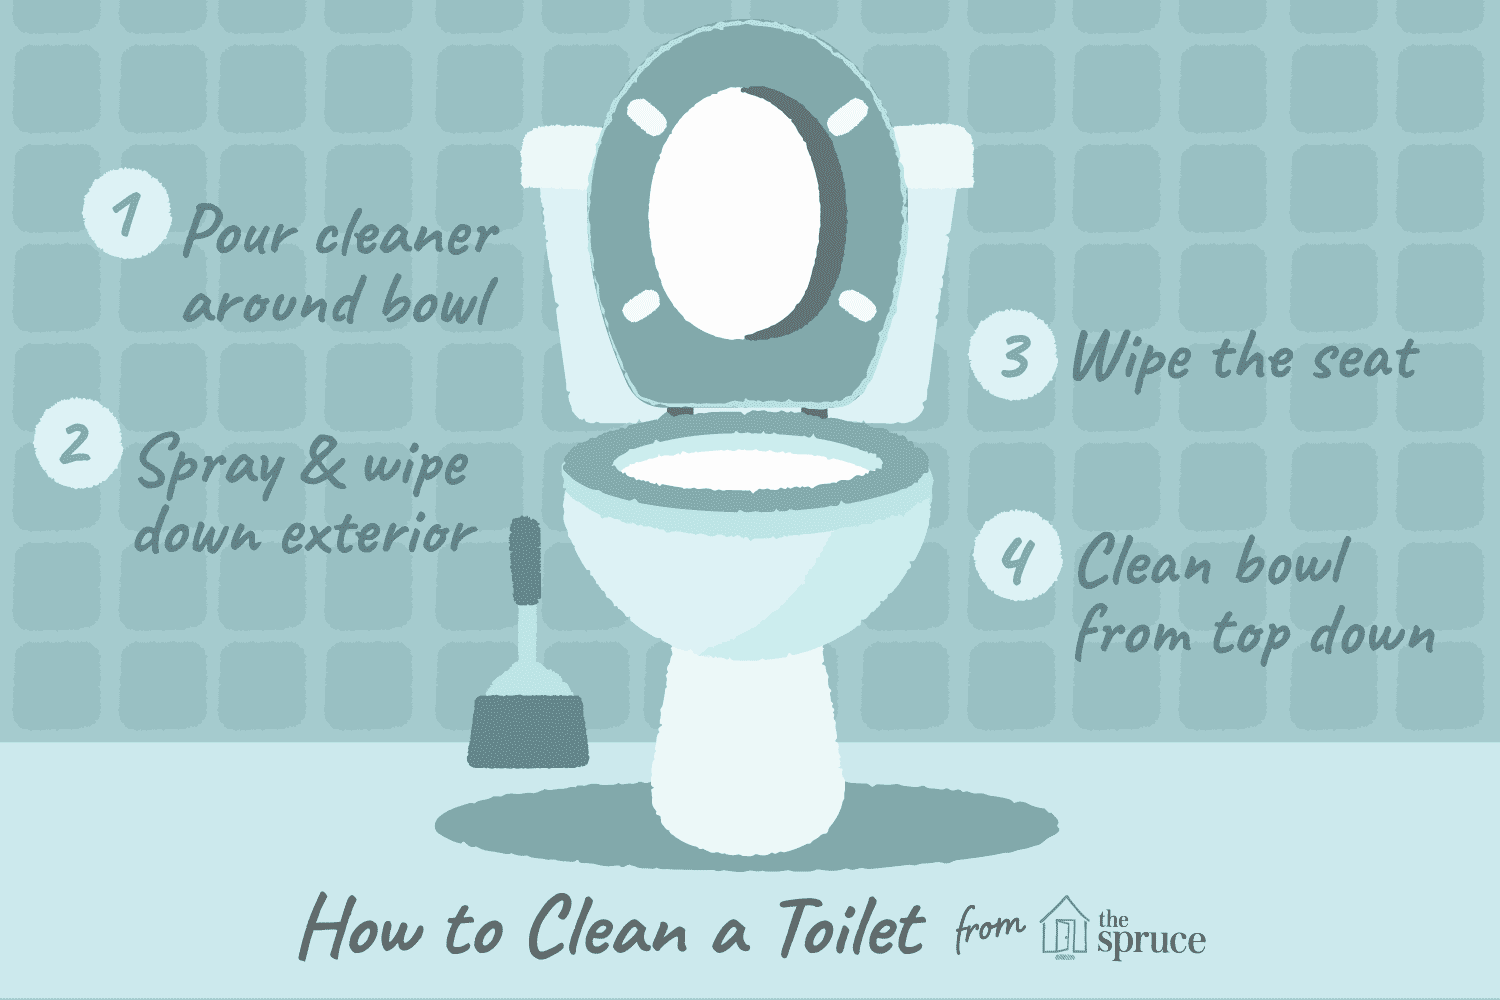 how to clean a toilet tank